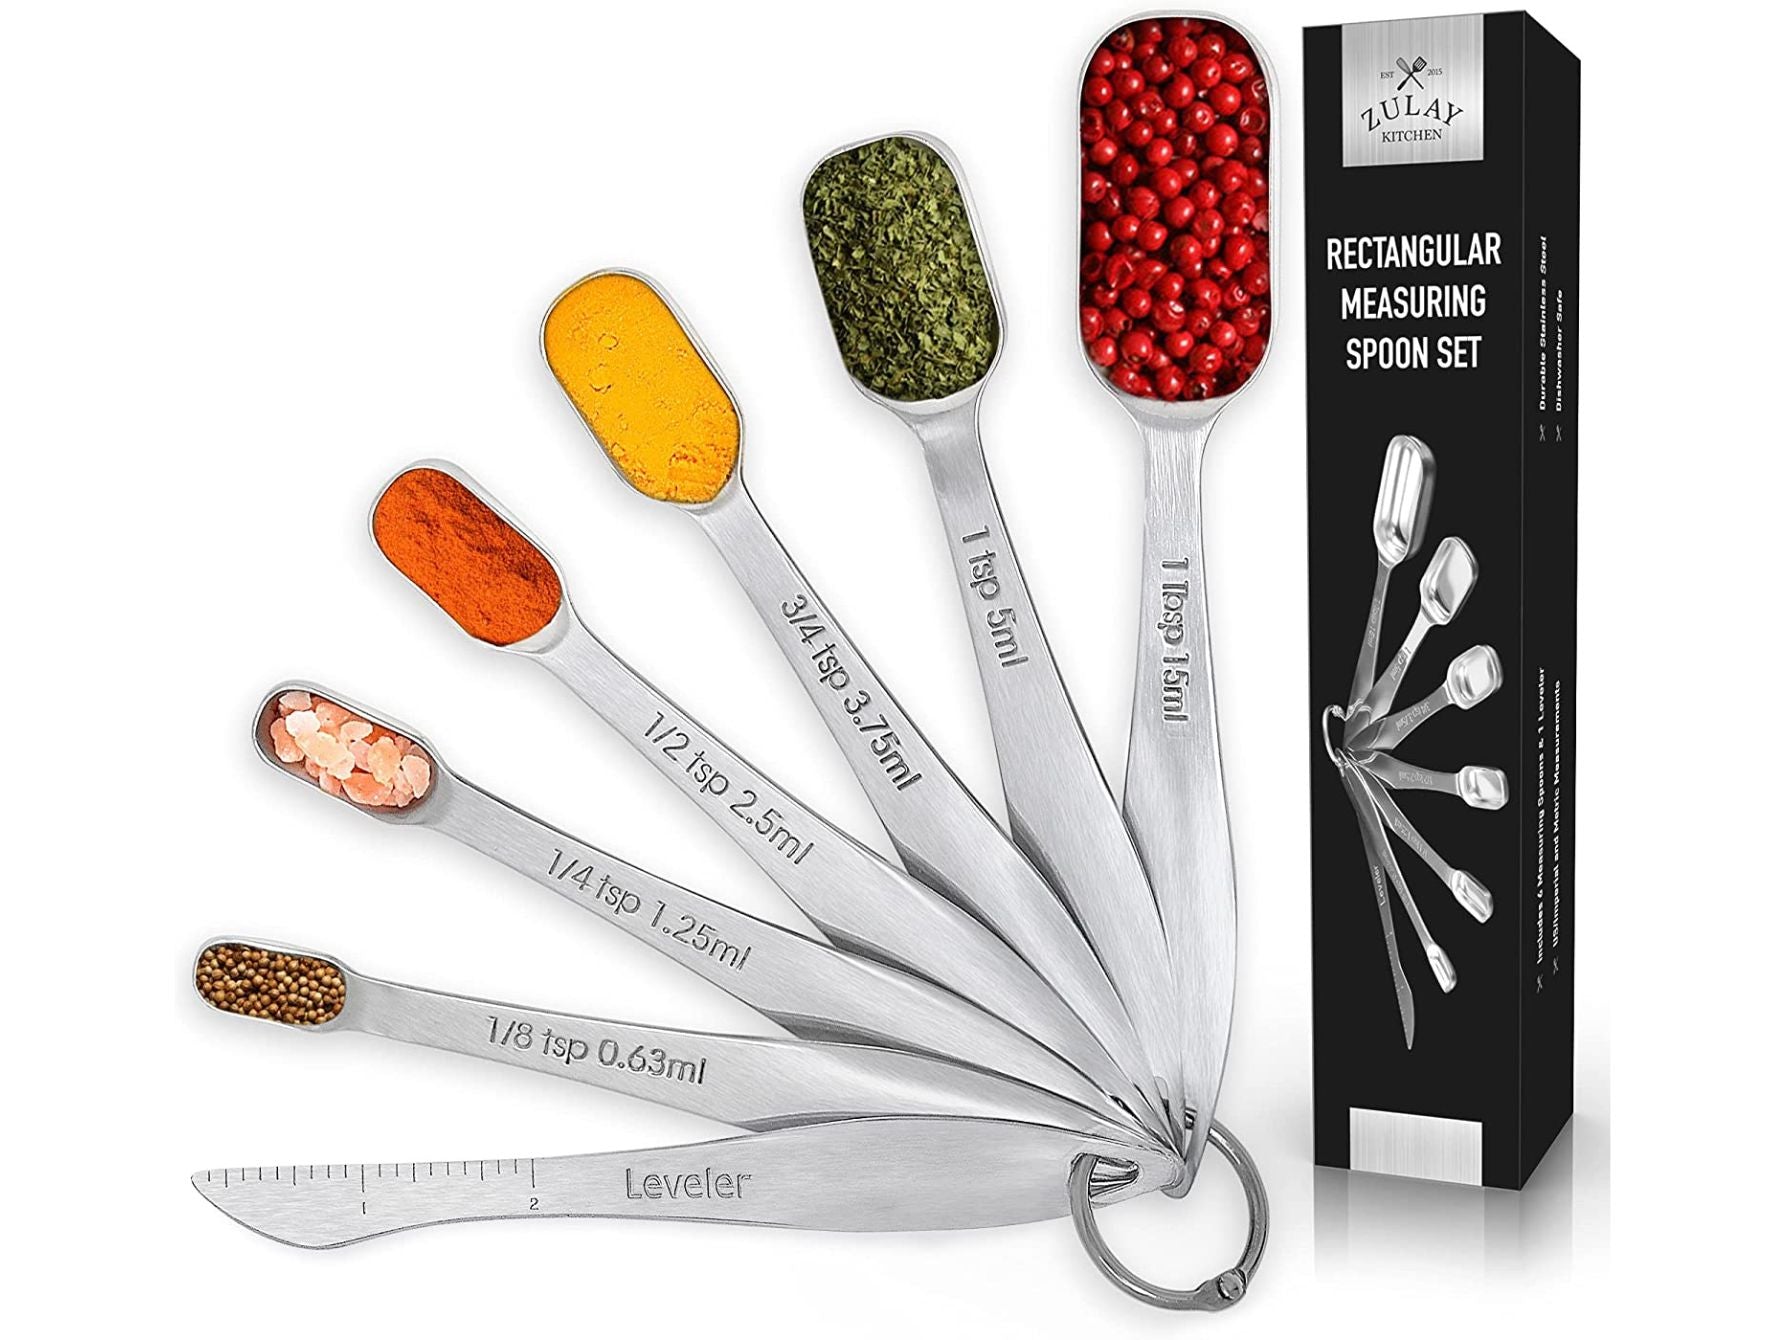 Measuring Spoon Set With Leveler - 7 Piece by Zulay Kitchen